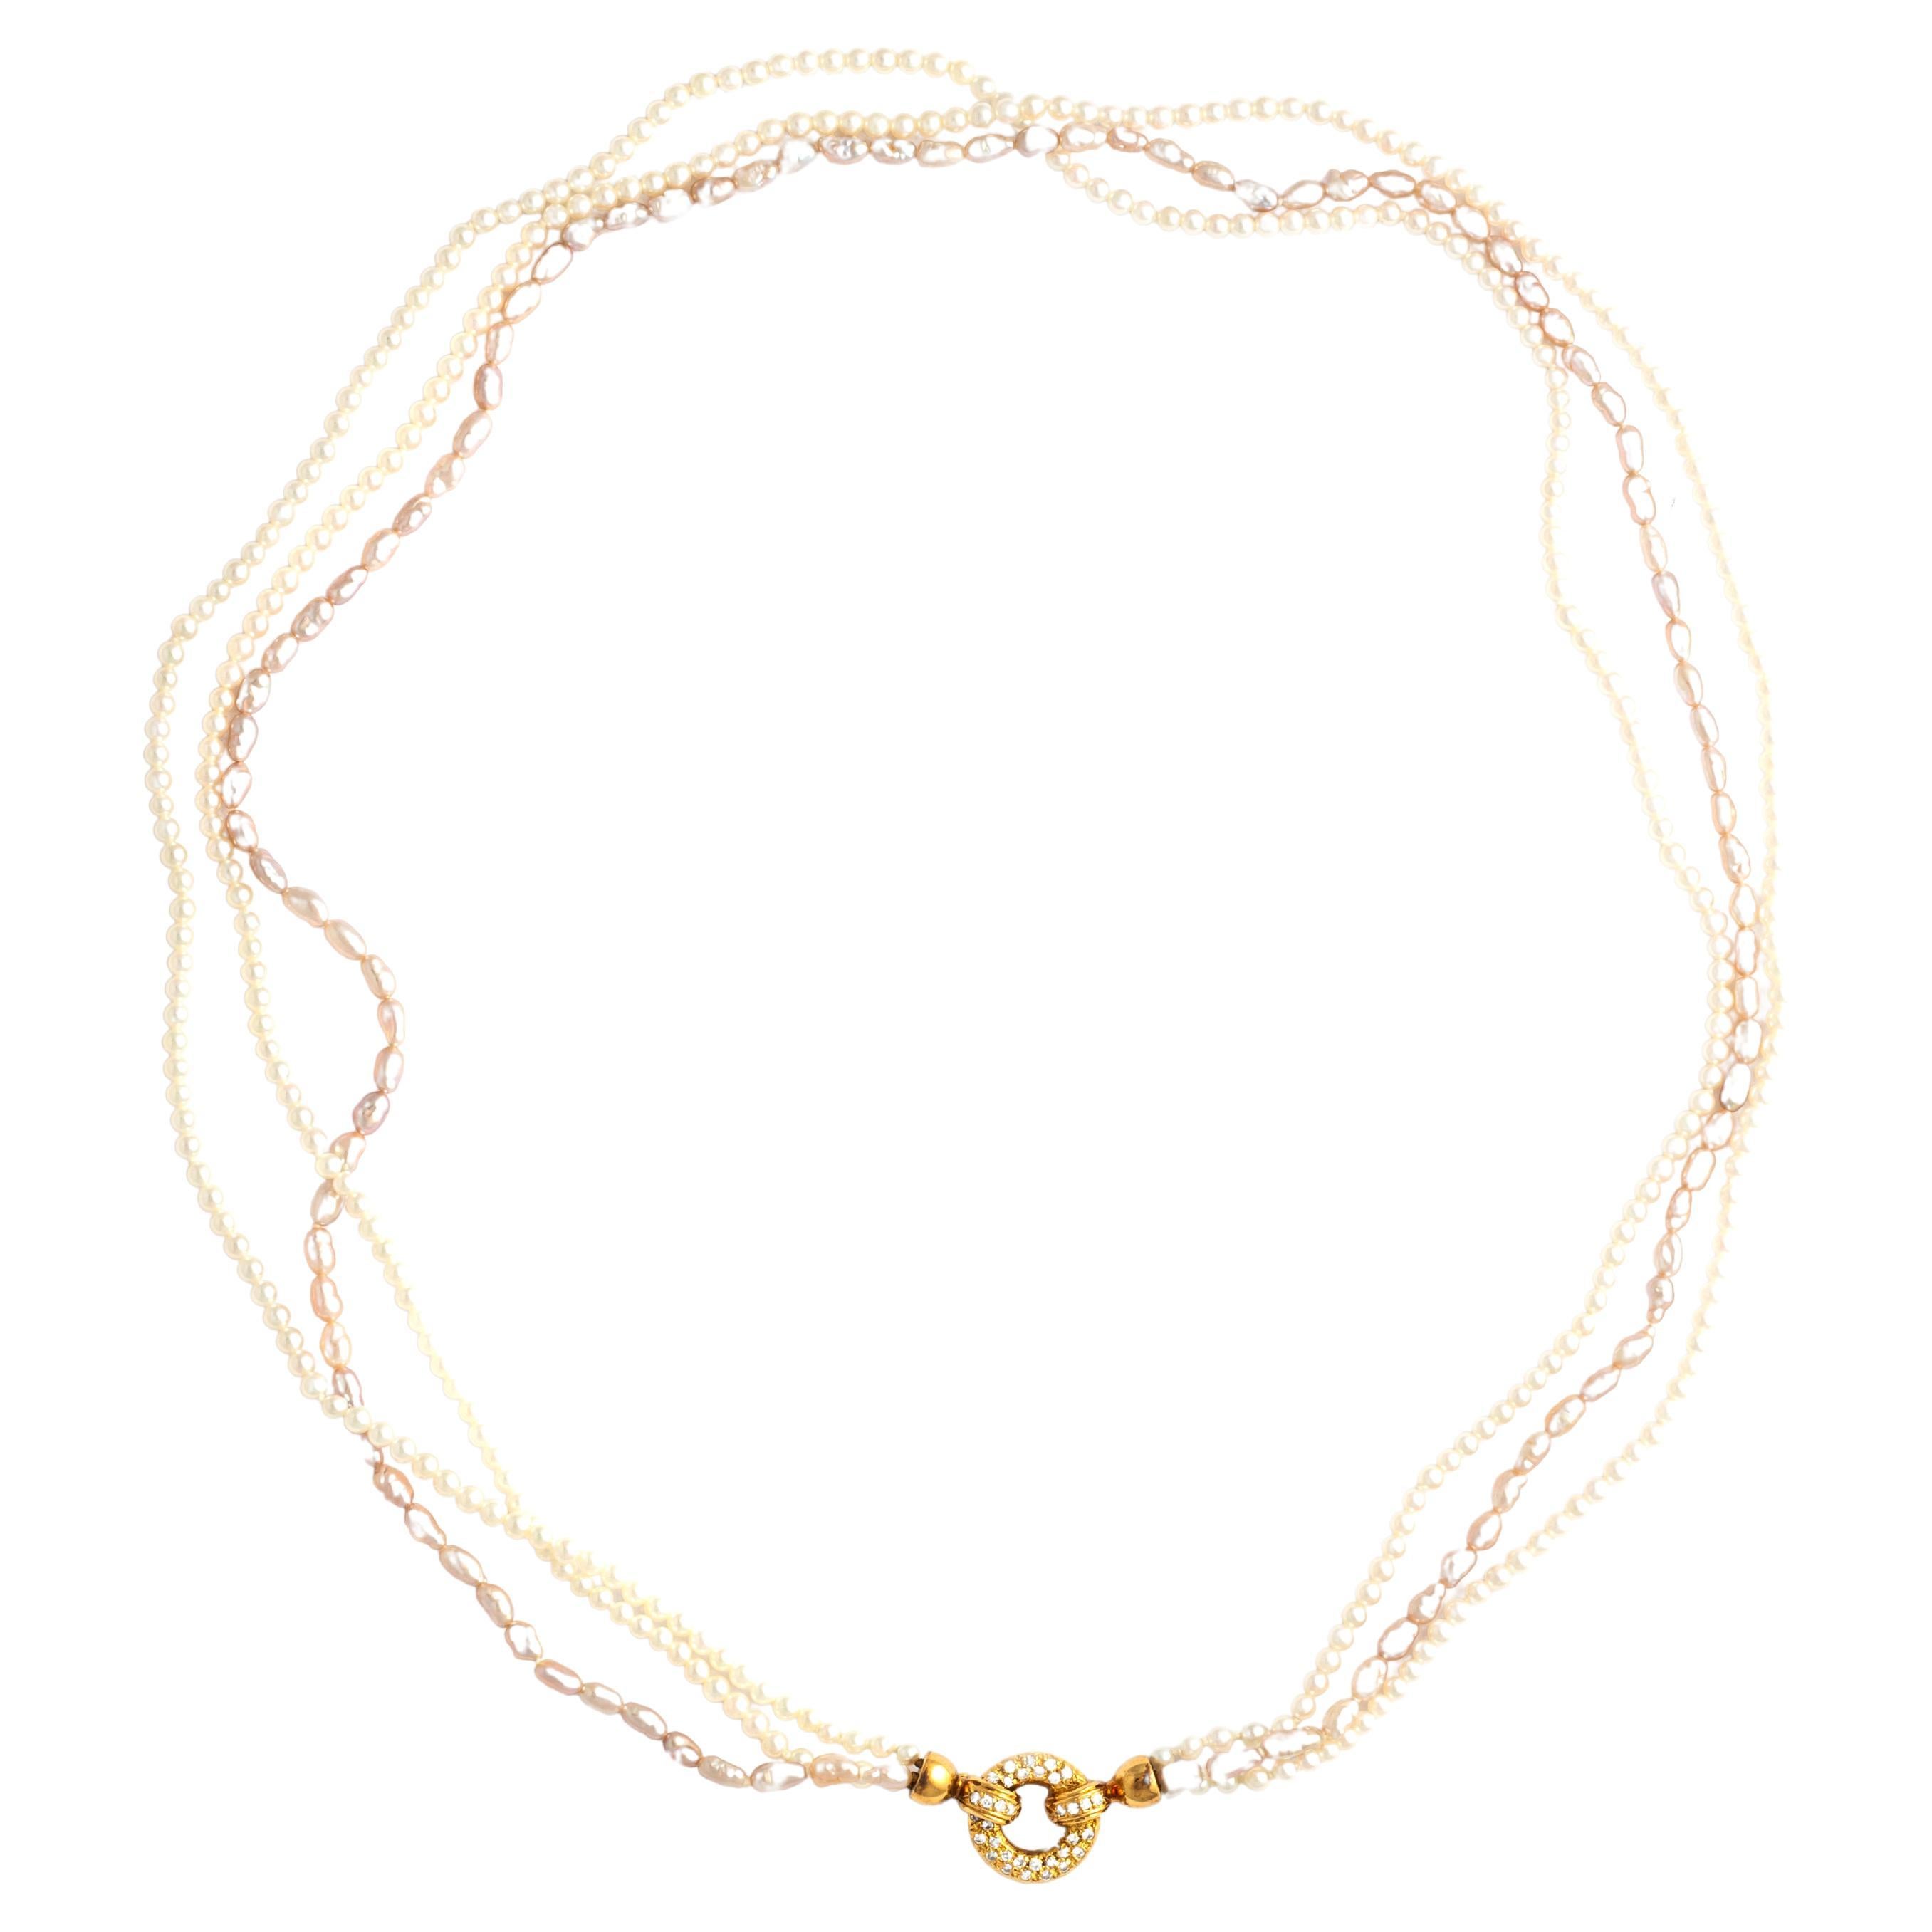 Cultured Pearl Necklace holding a Diamond Yellow Gold 18K clasp.The timeless allure of cultured pearls meets the brilliance of diamonds in a harmonious union of elegance and luxury.

The necklace showcases lustrous cultured pearls, each one